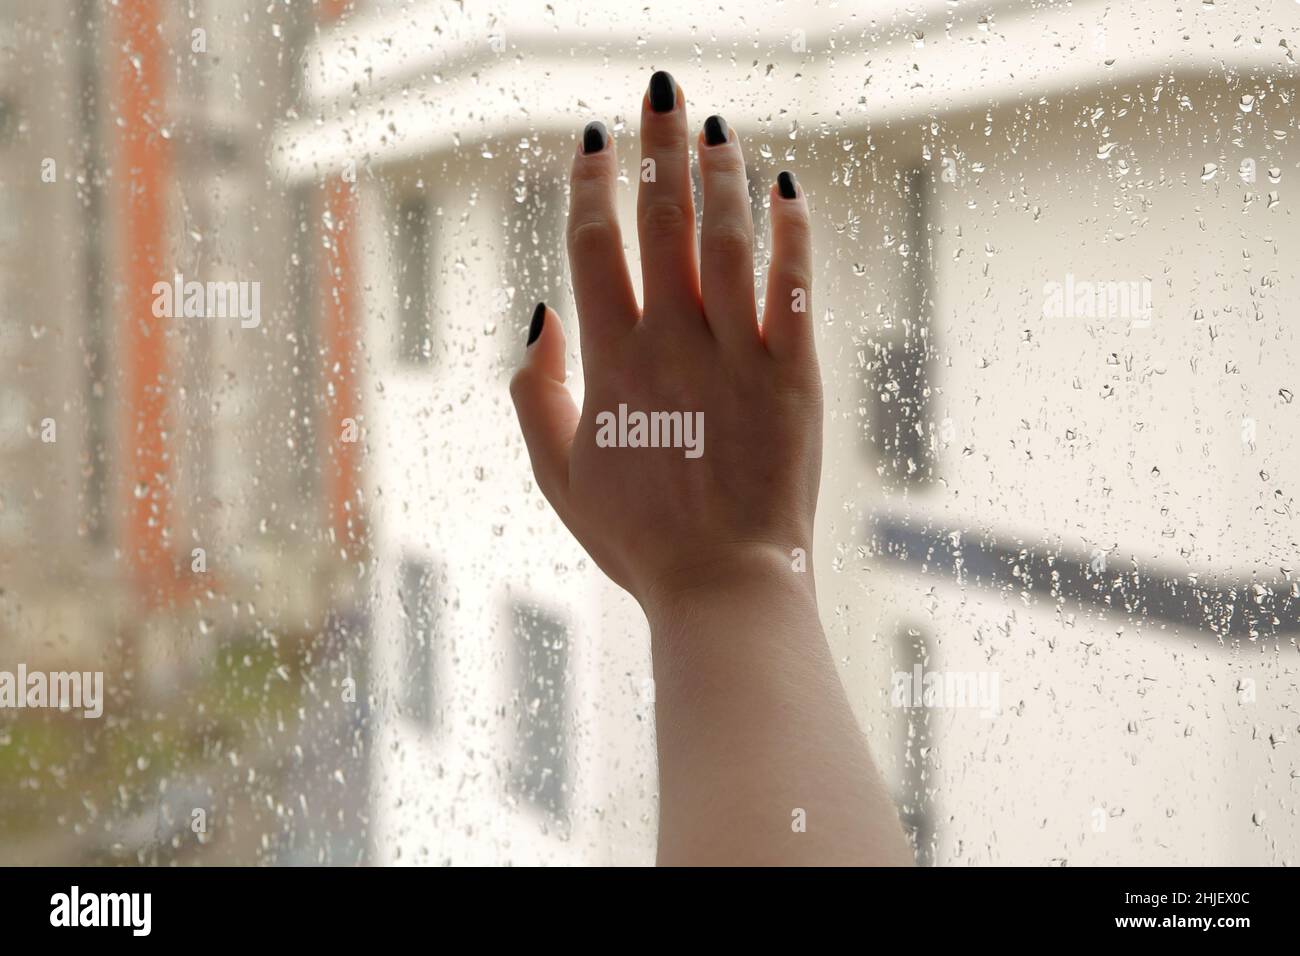 Hand of young girl touches window glass, outside rainy cold weather, urban area Stock Photo